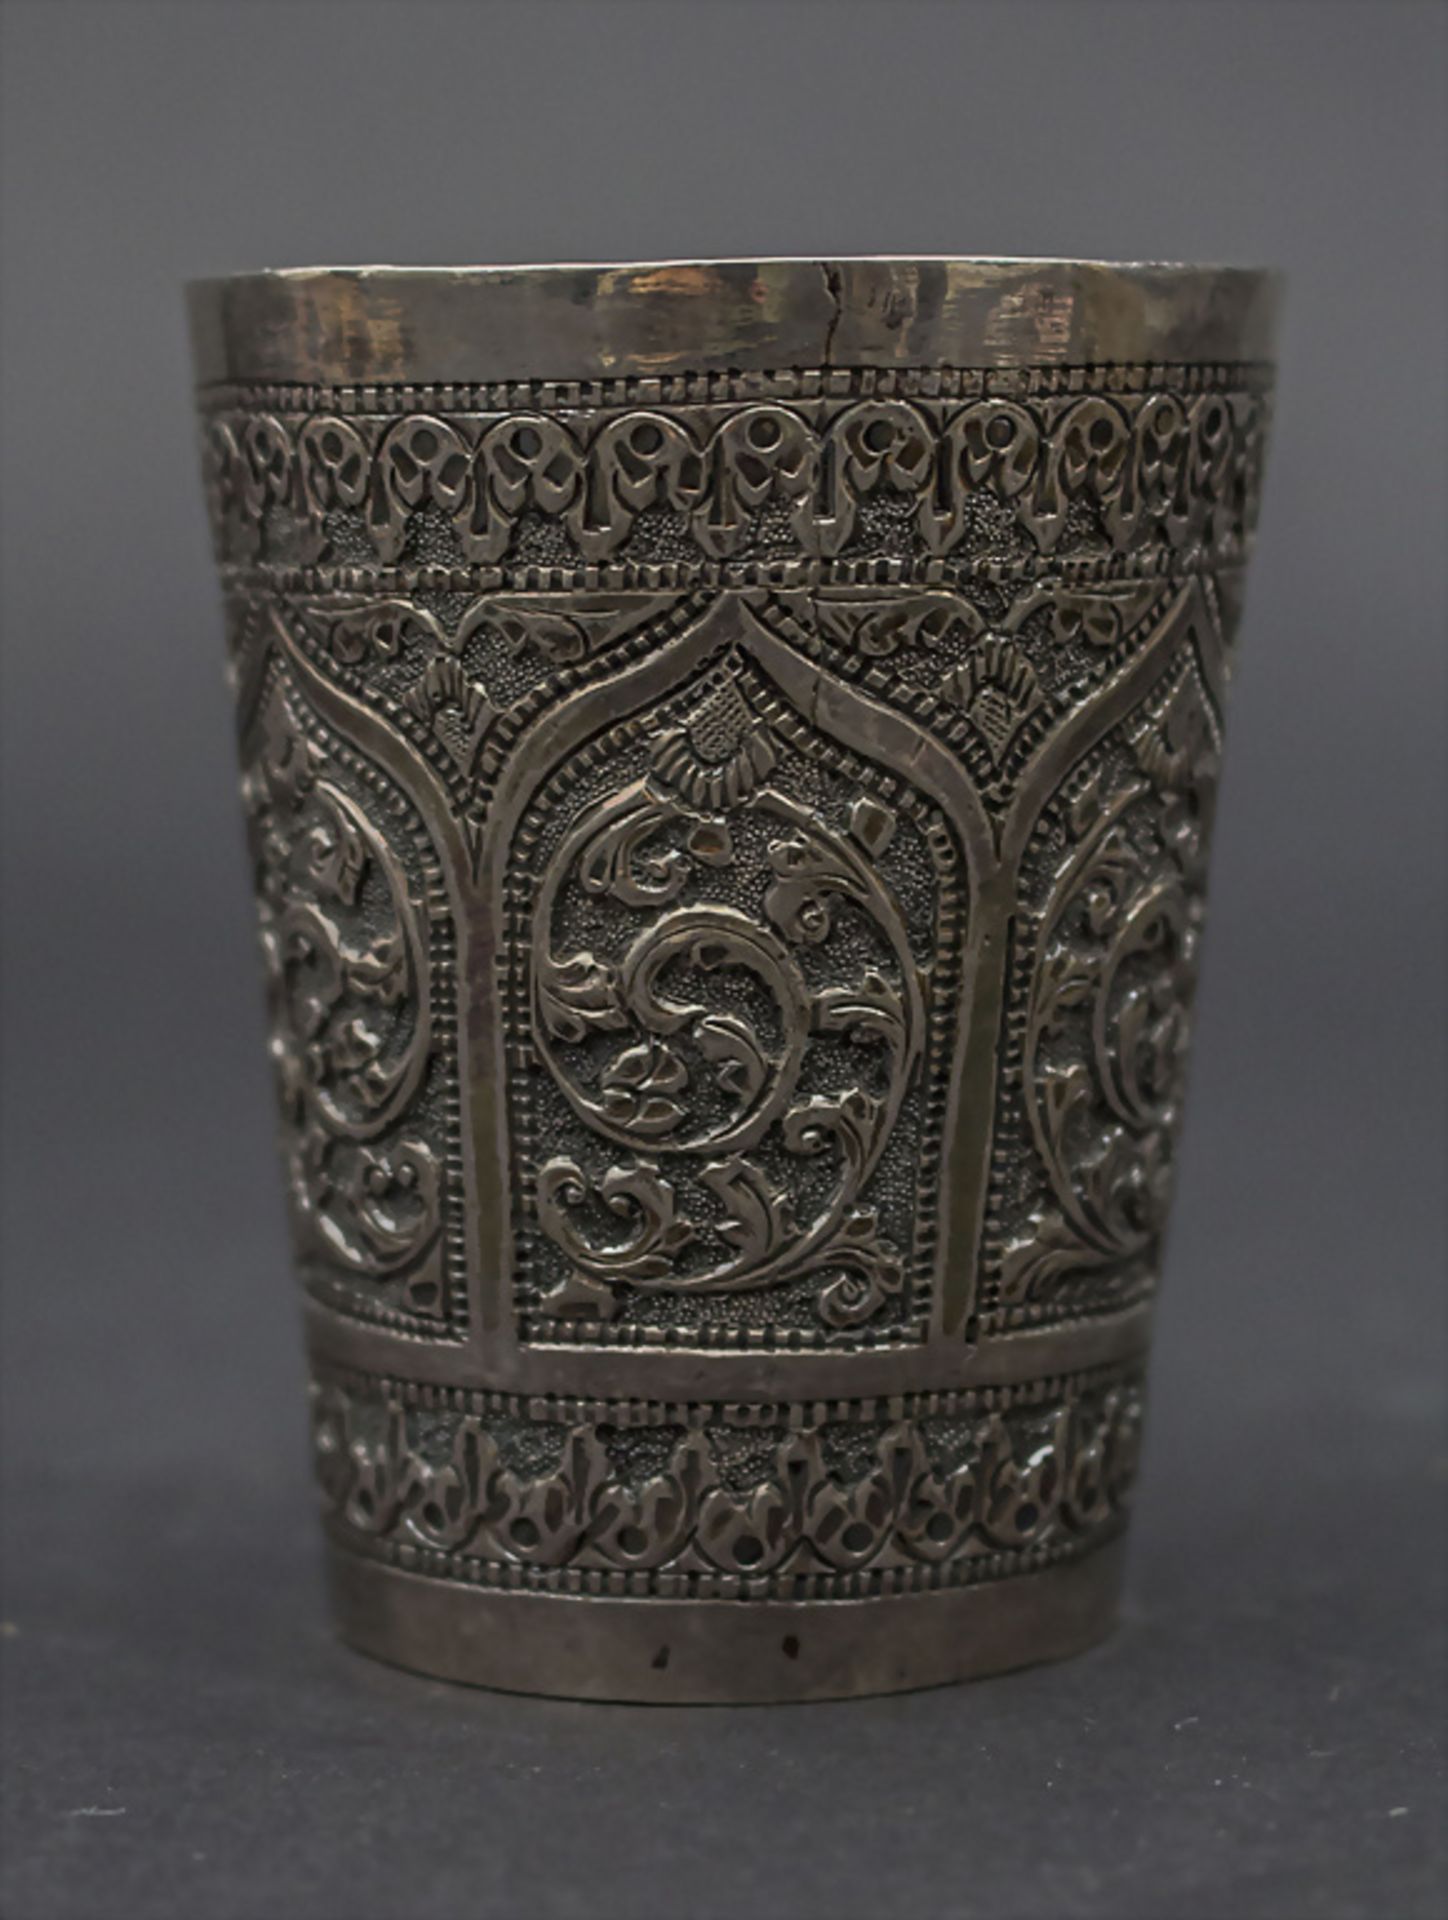 Silber Lotusschale und Becher / A silver lotus bowl and beaker, Thailand - Image 4 of 6